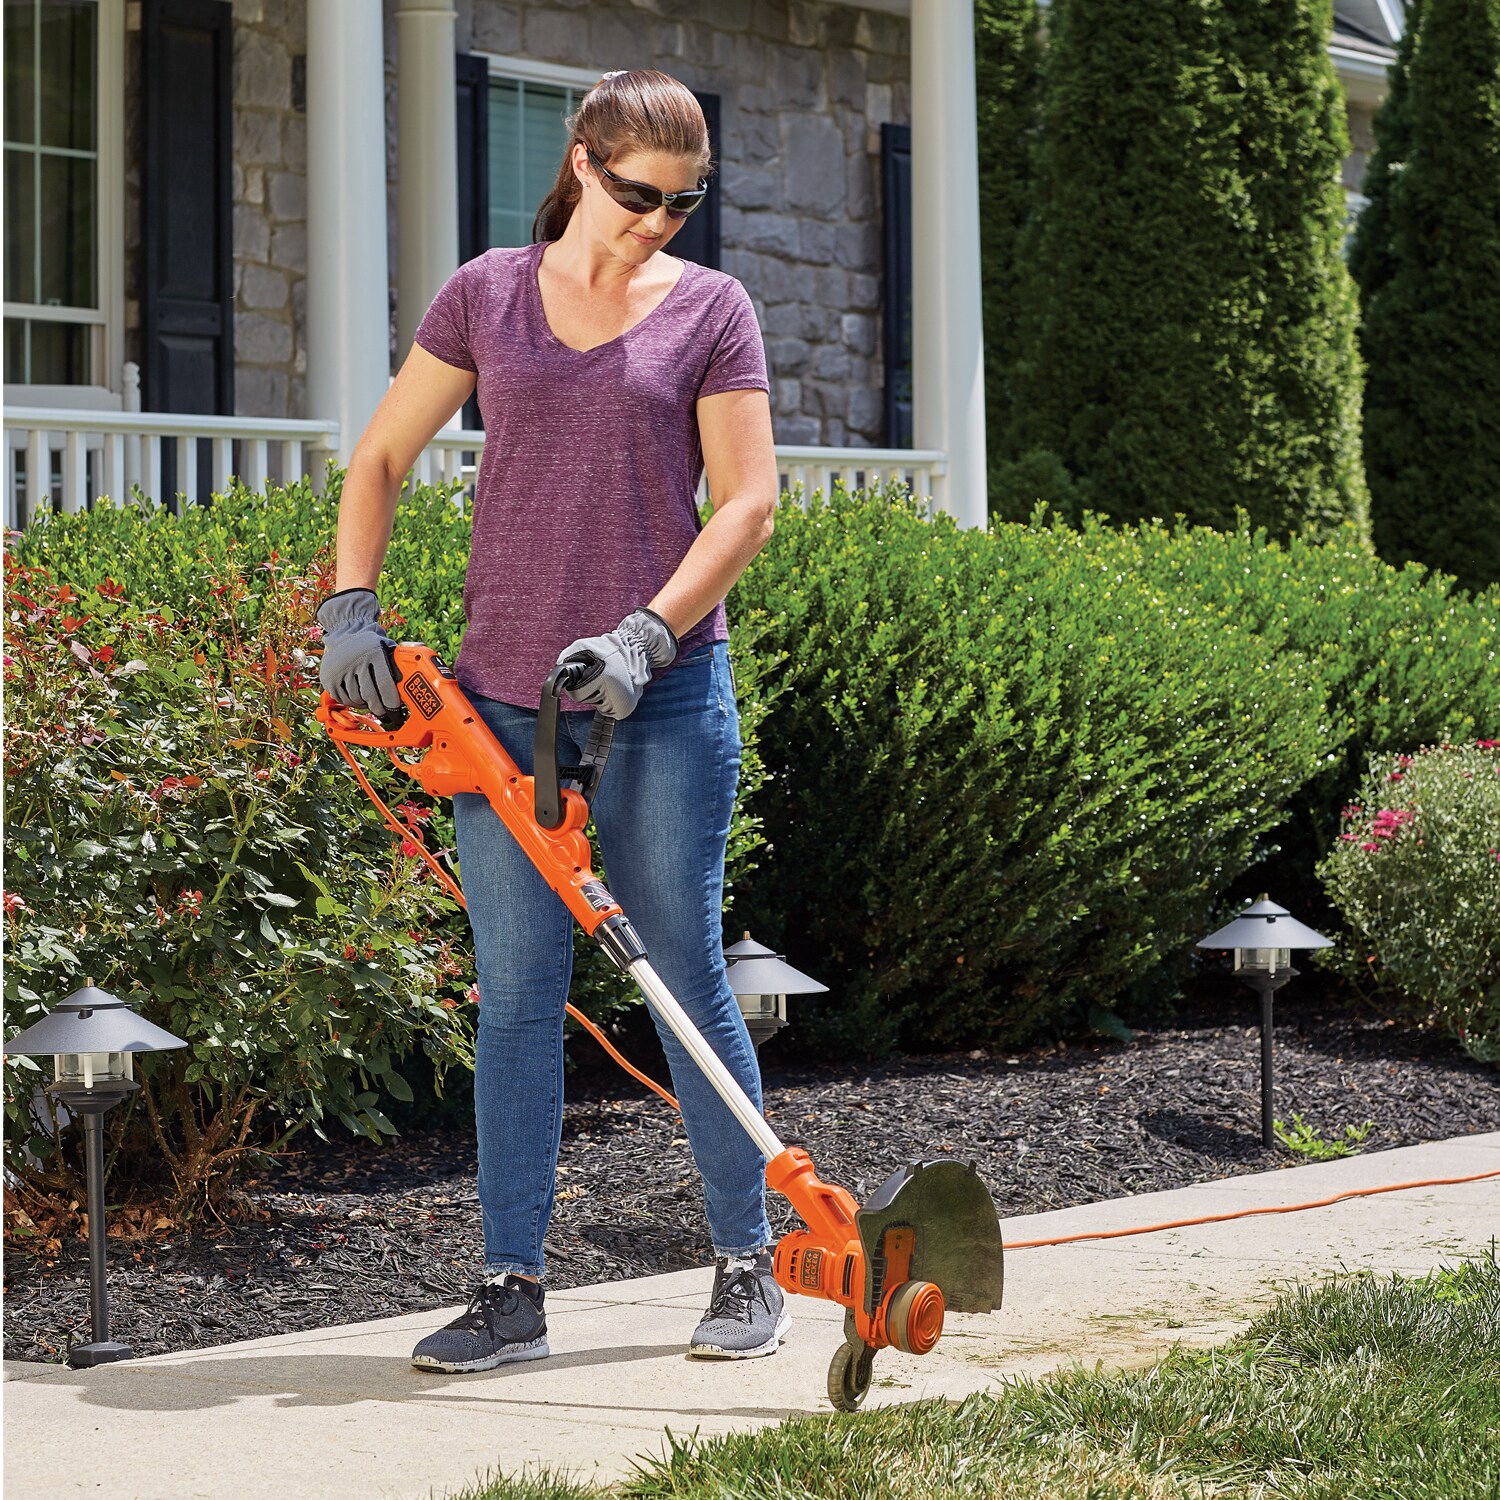 Black and Decker GH900 - 6.5 Amp String Trimmer (Type 1) 